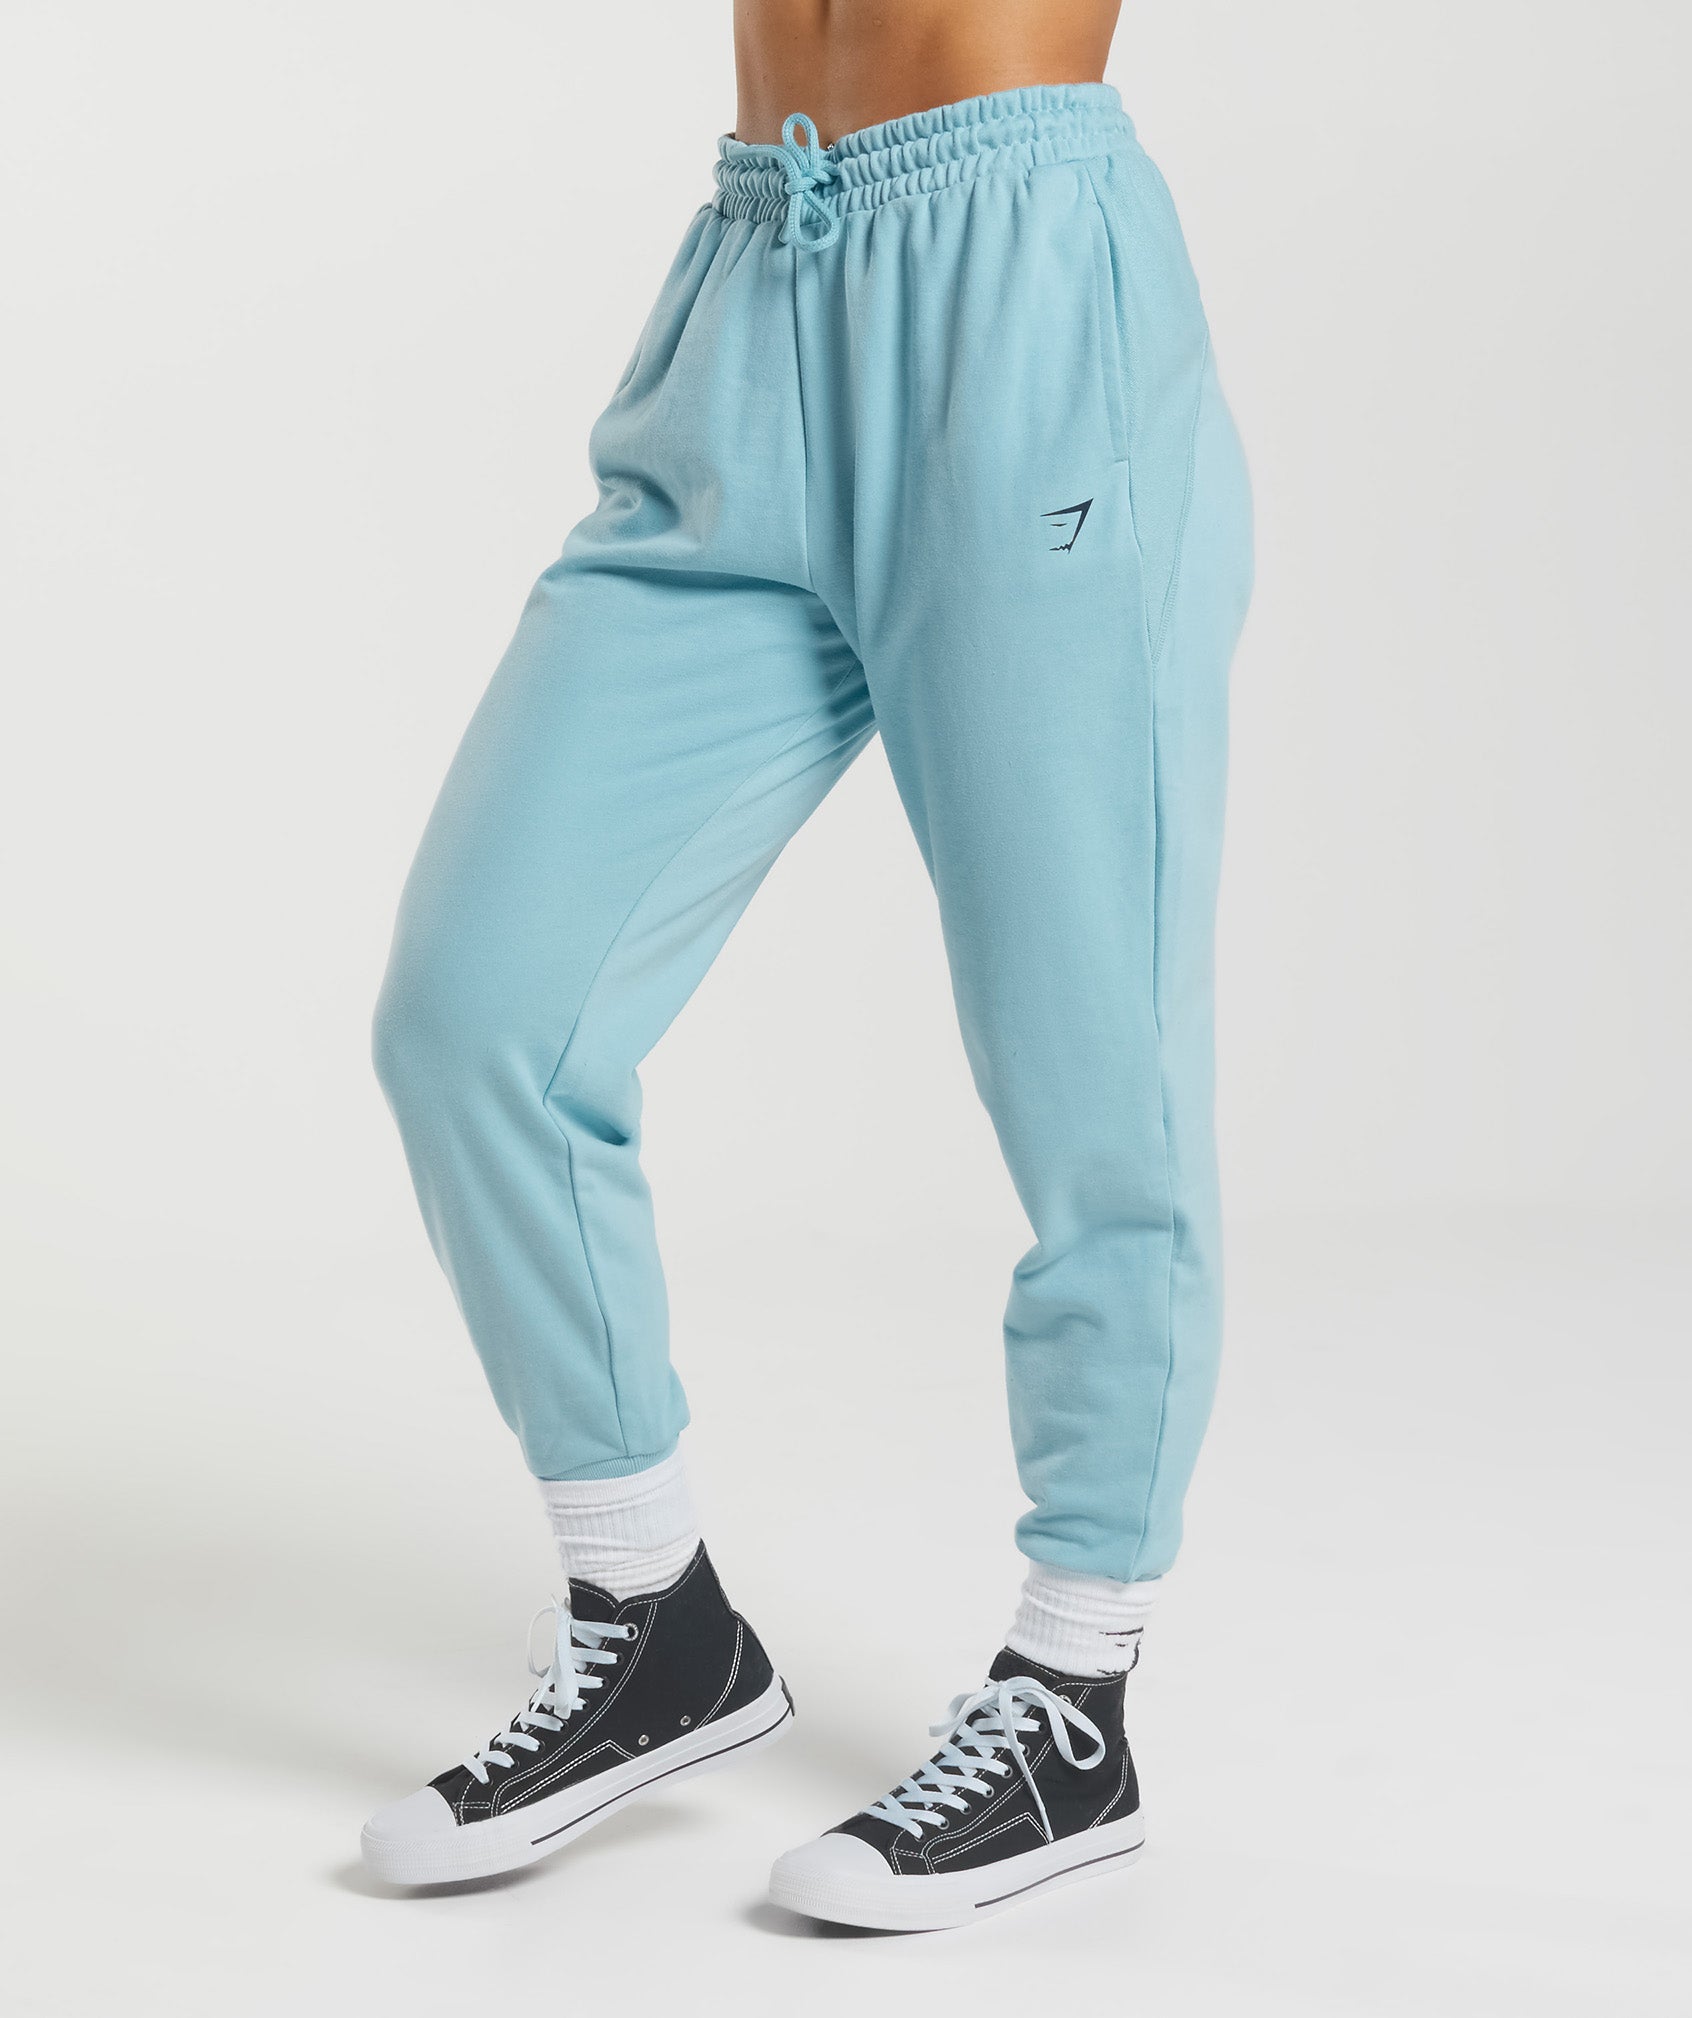 GS Power Joggers in Iceberg Blue - view 1